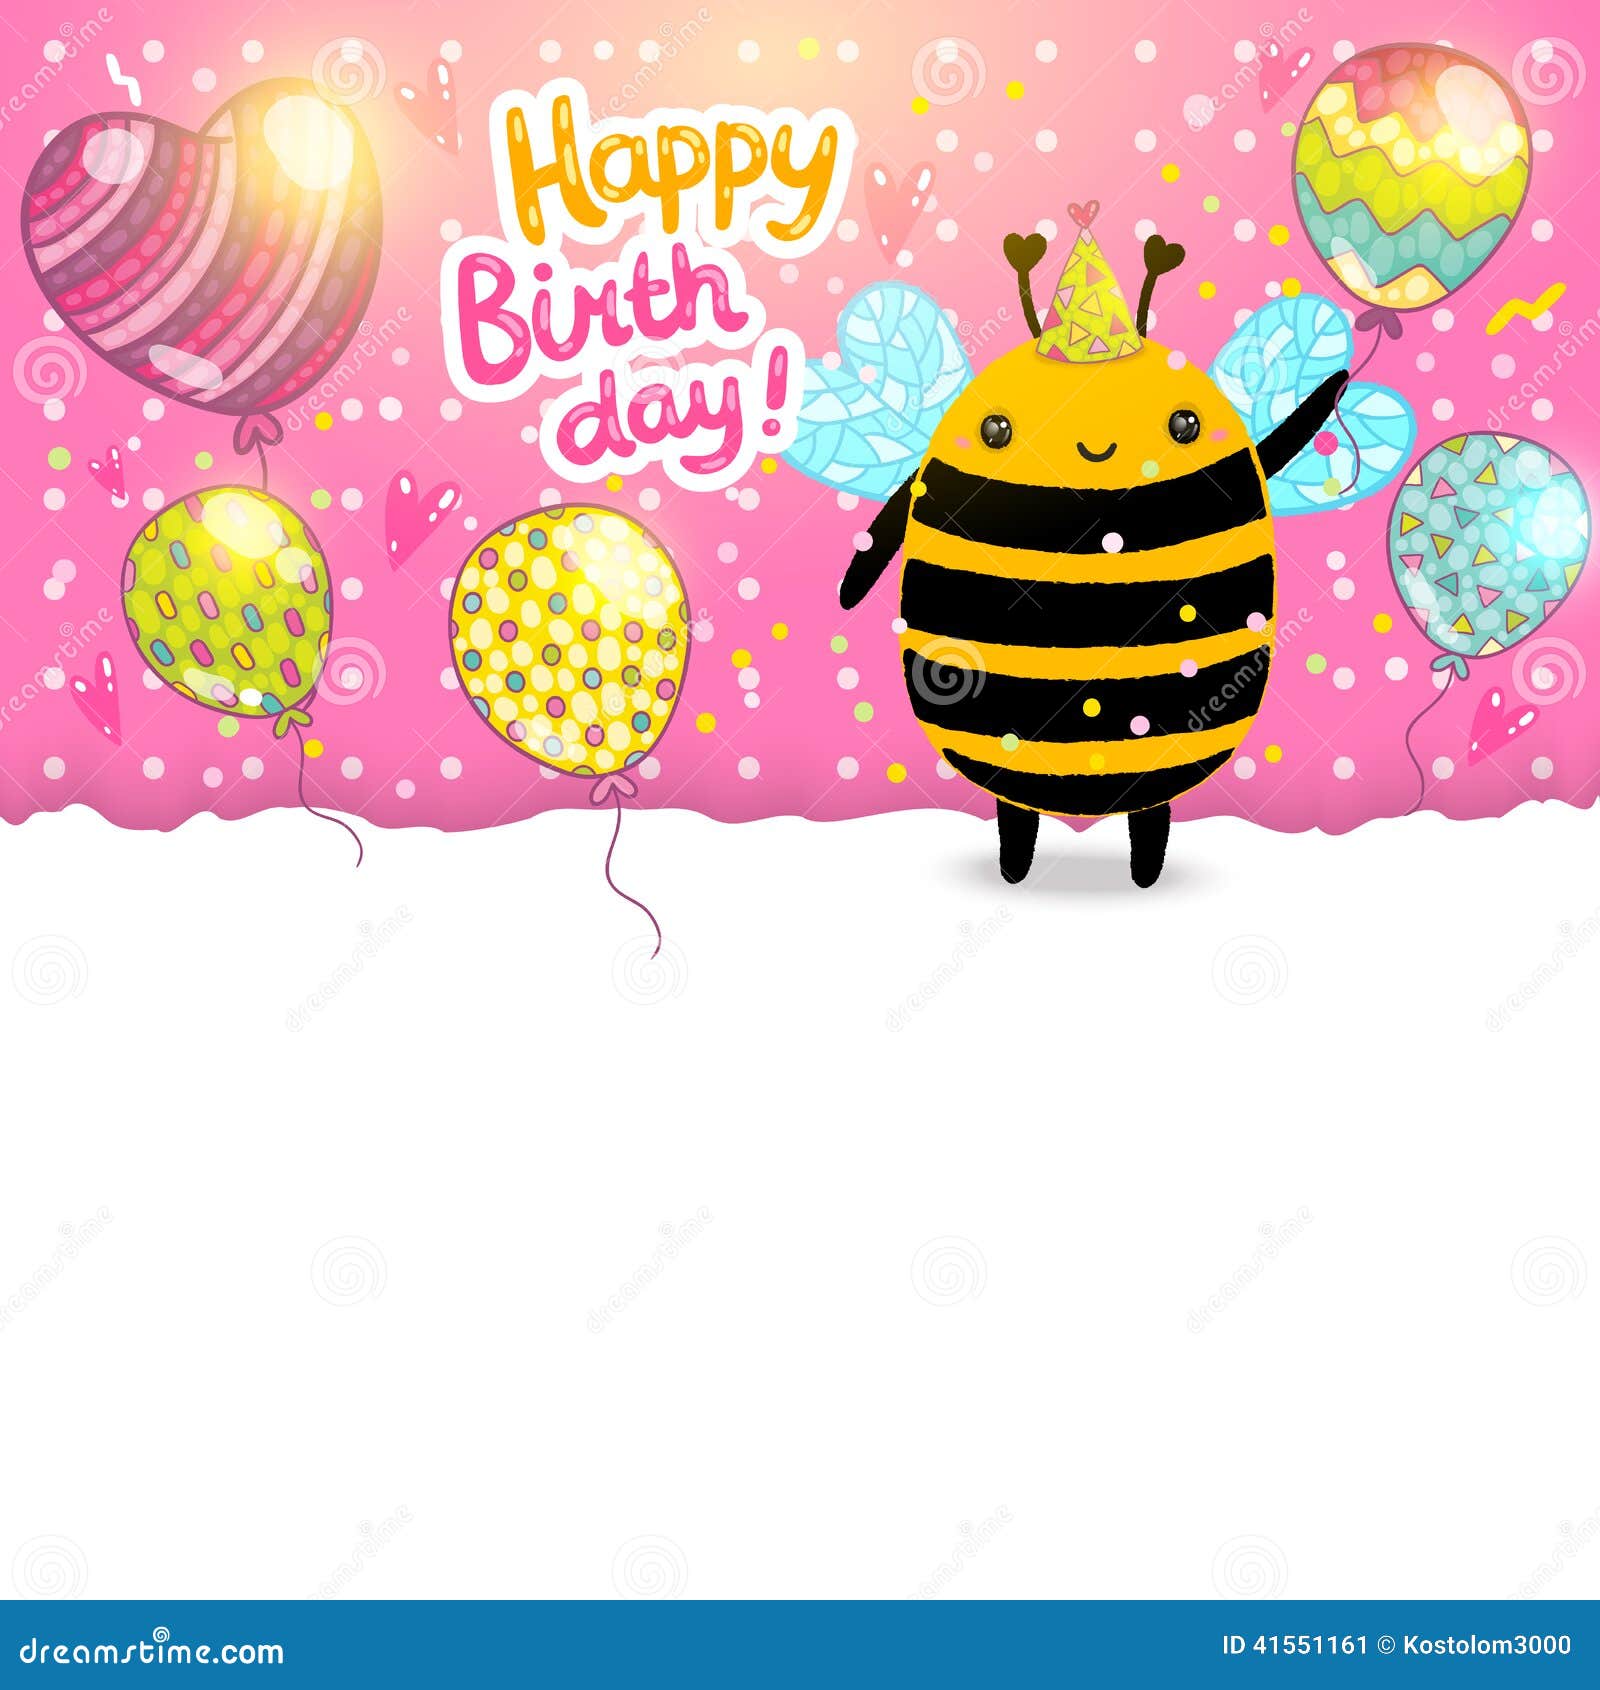 Happy Birthday Card Background With A Bee. Stock Vector - Illustration ...